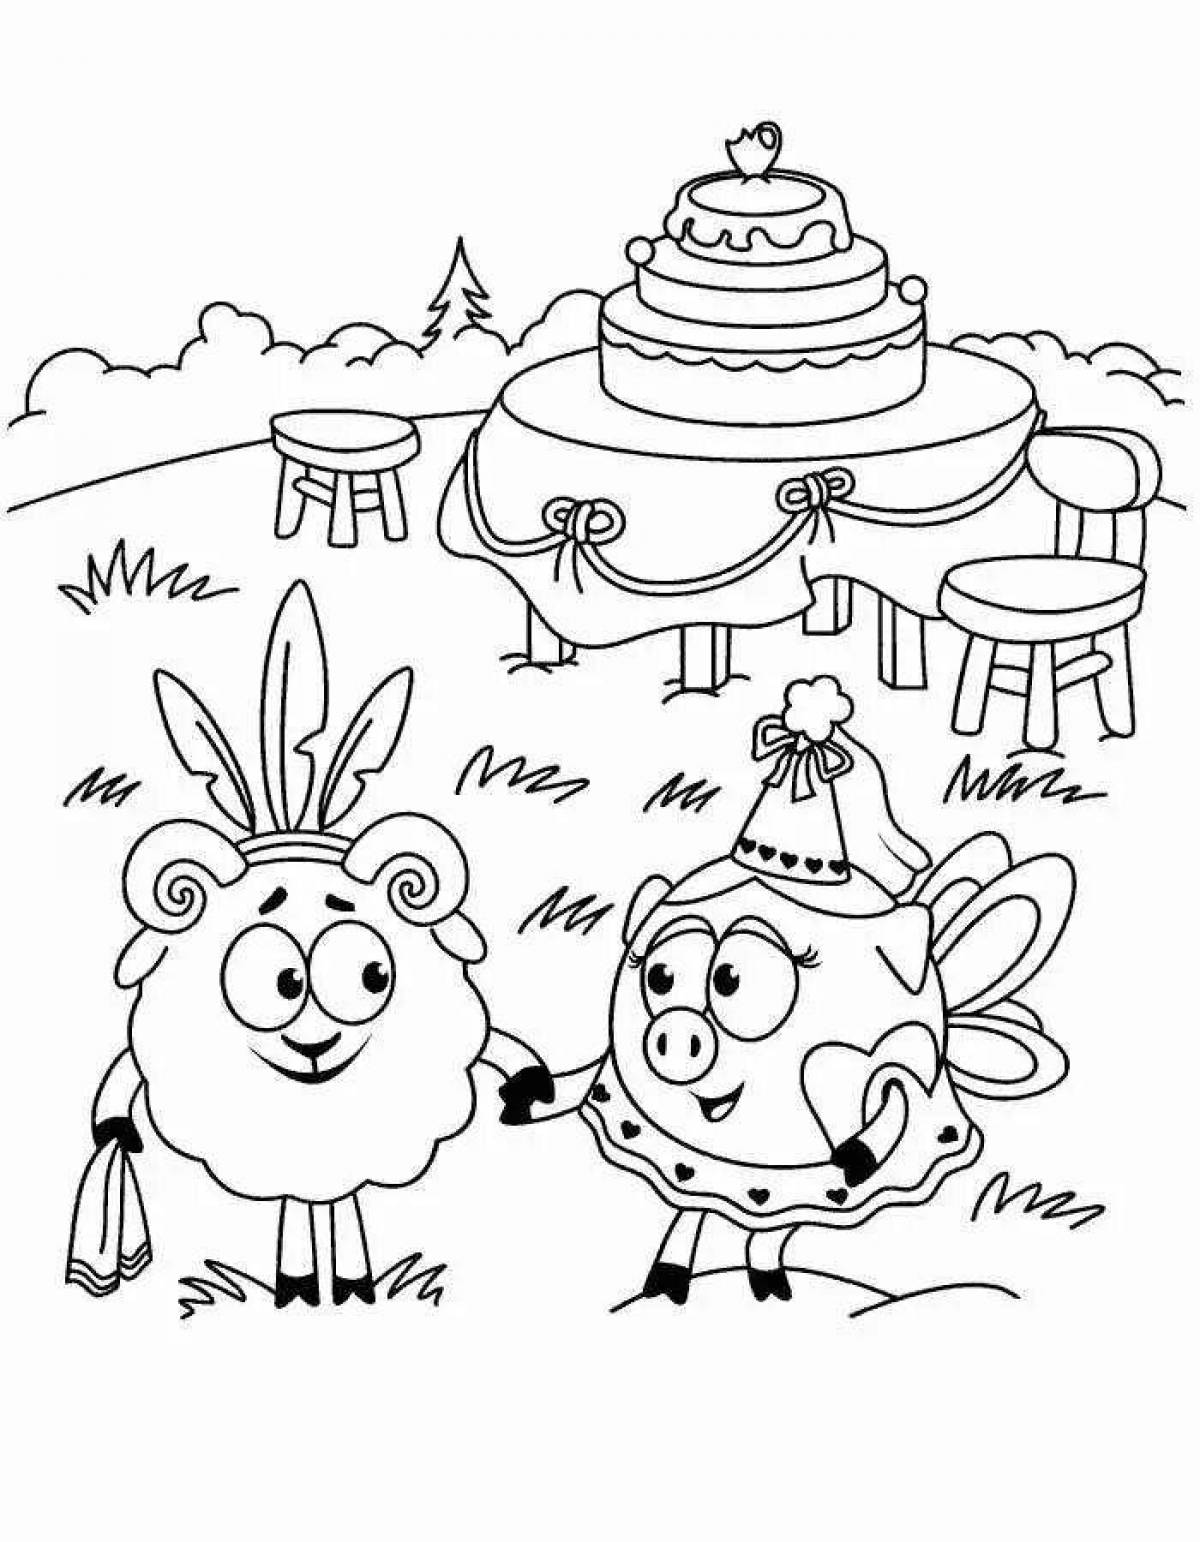 Creative smeshariki coloring pages